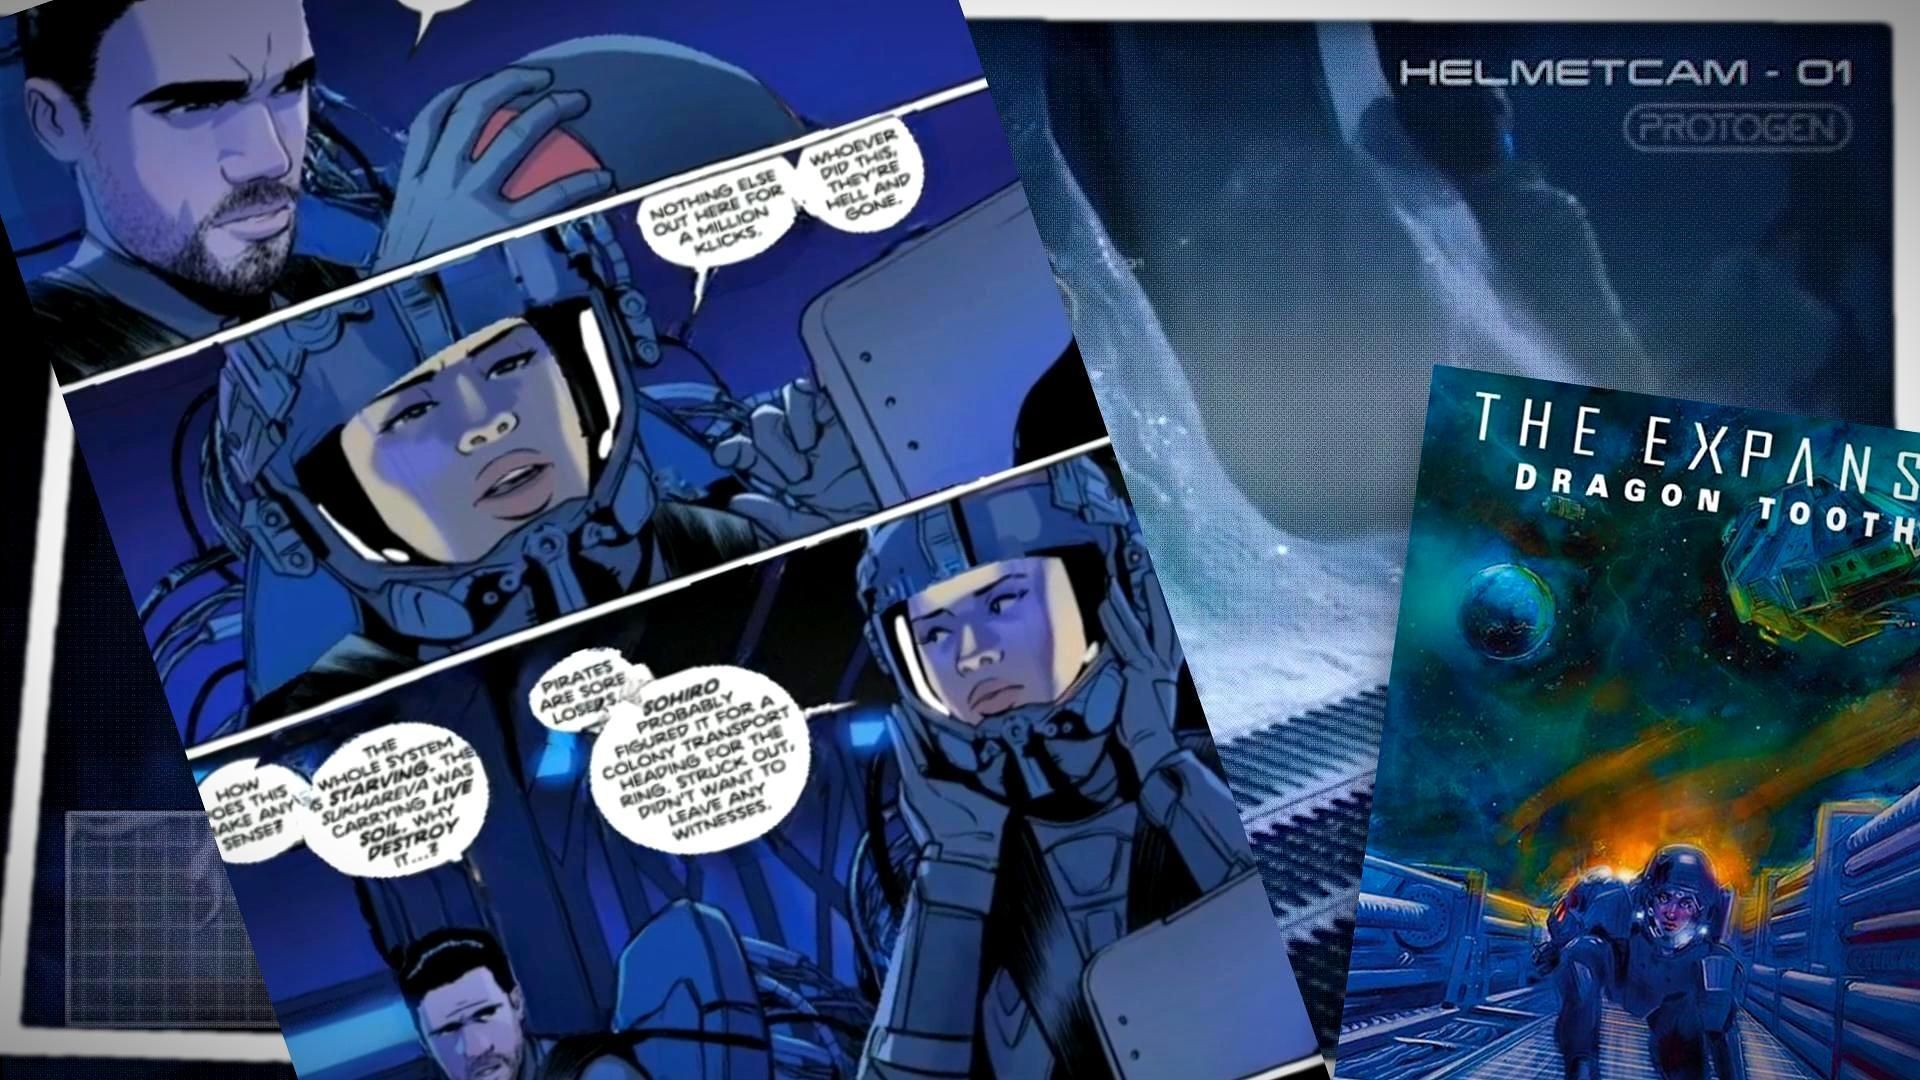 The Expanse: Dragon Tooth' creators on their new comic series (exclusive)